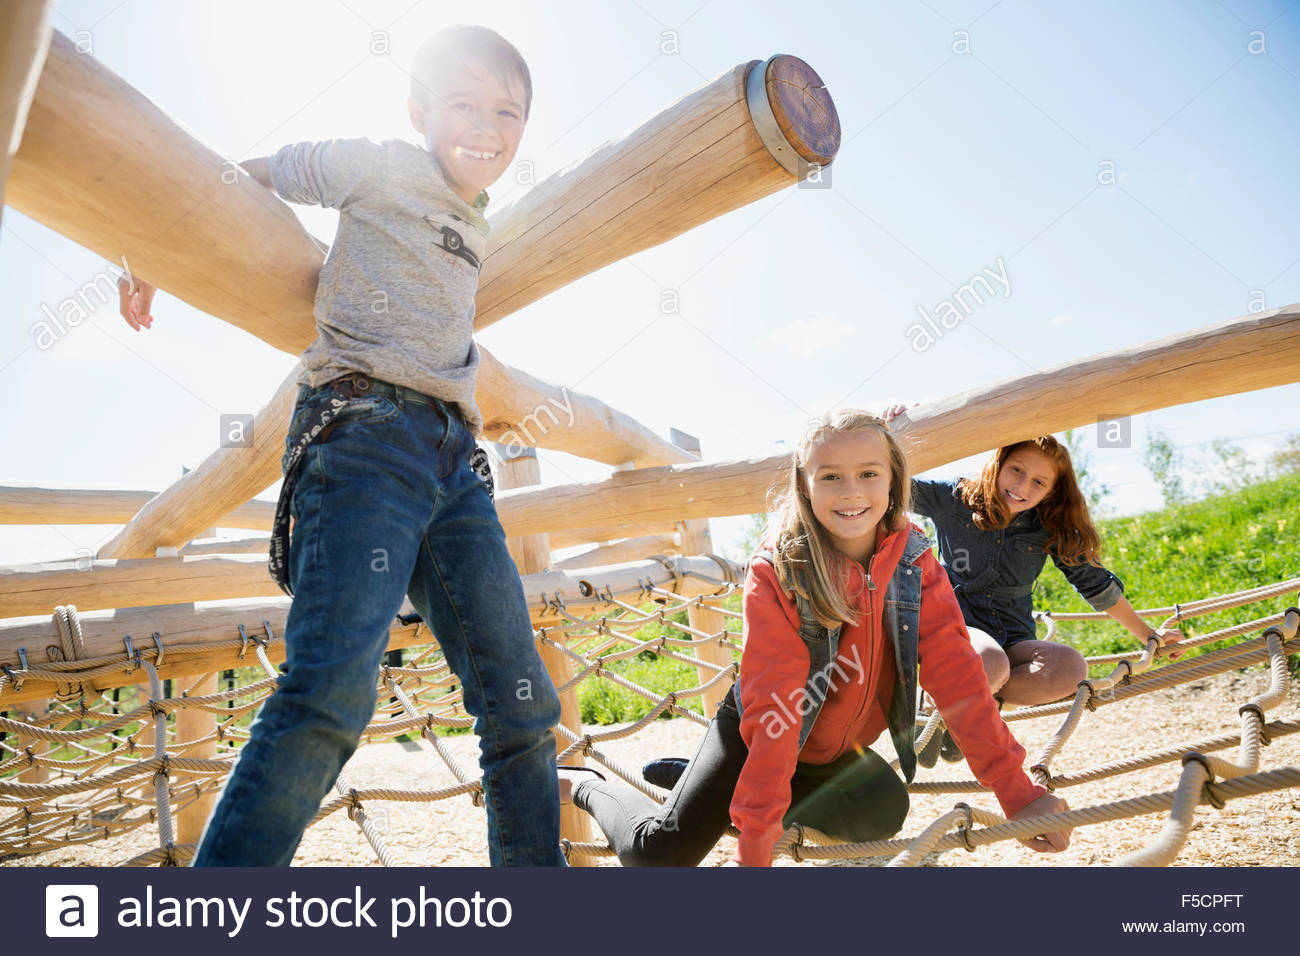 Portrait kids playing logs and net sunny playground Stock Photo